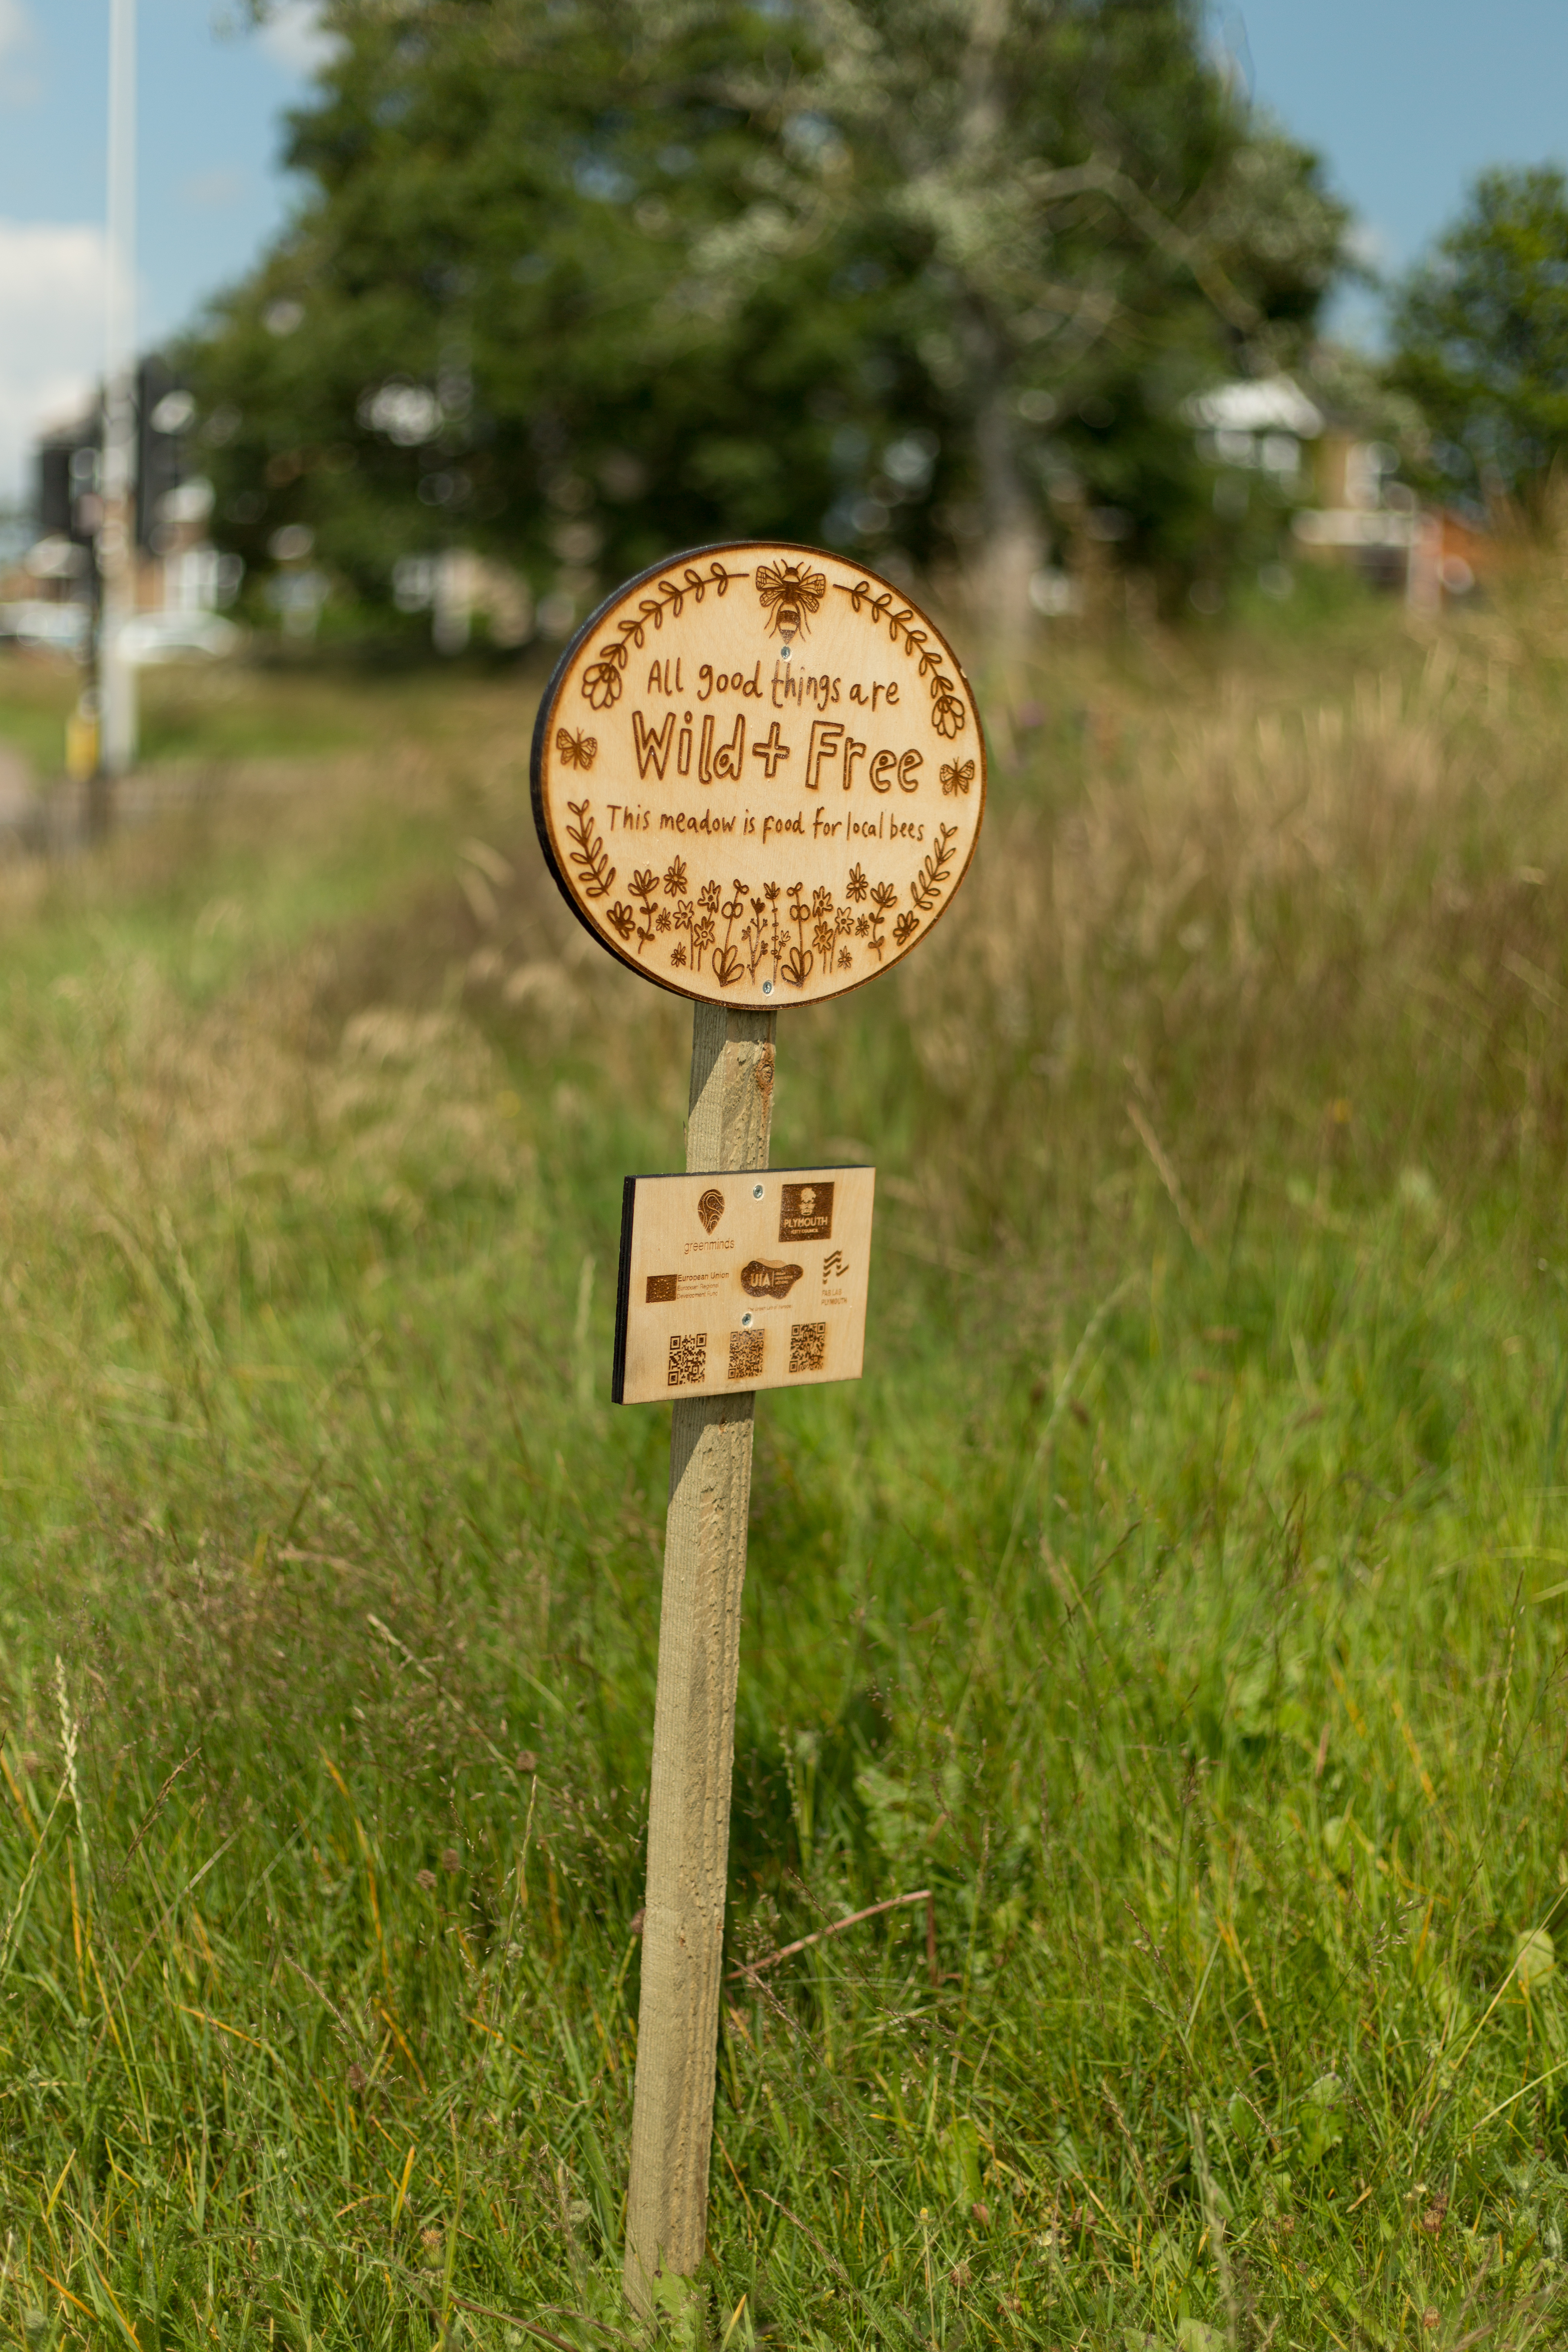 Wildflower meadow sign designed by Genevieve Stewart second year BA Hons Printed Textile Design Surface Pattern student at Plymouth College of Art Image Credit Ray Goodwin